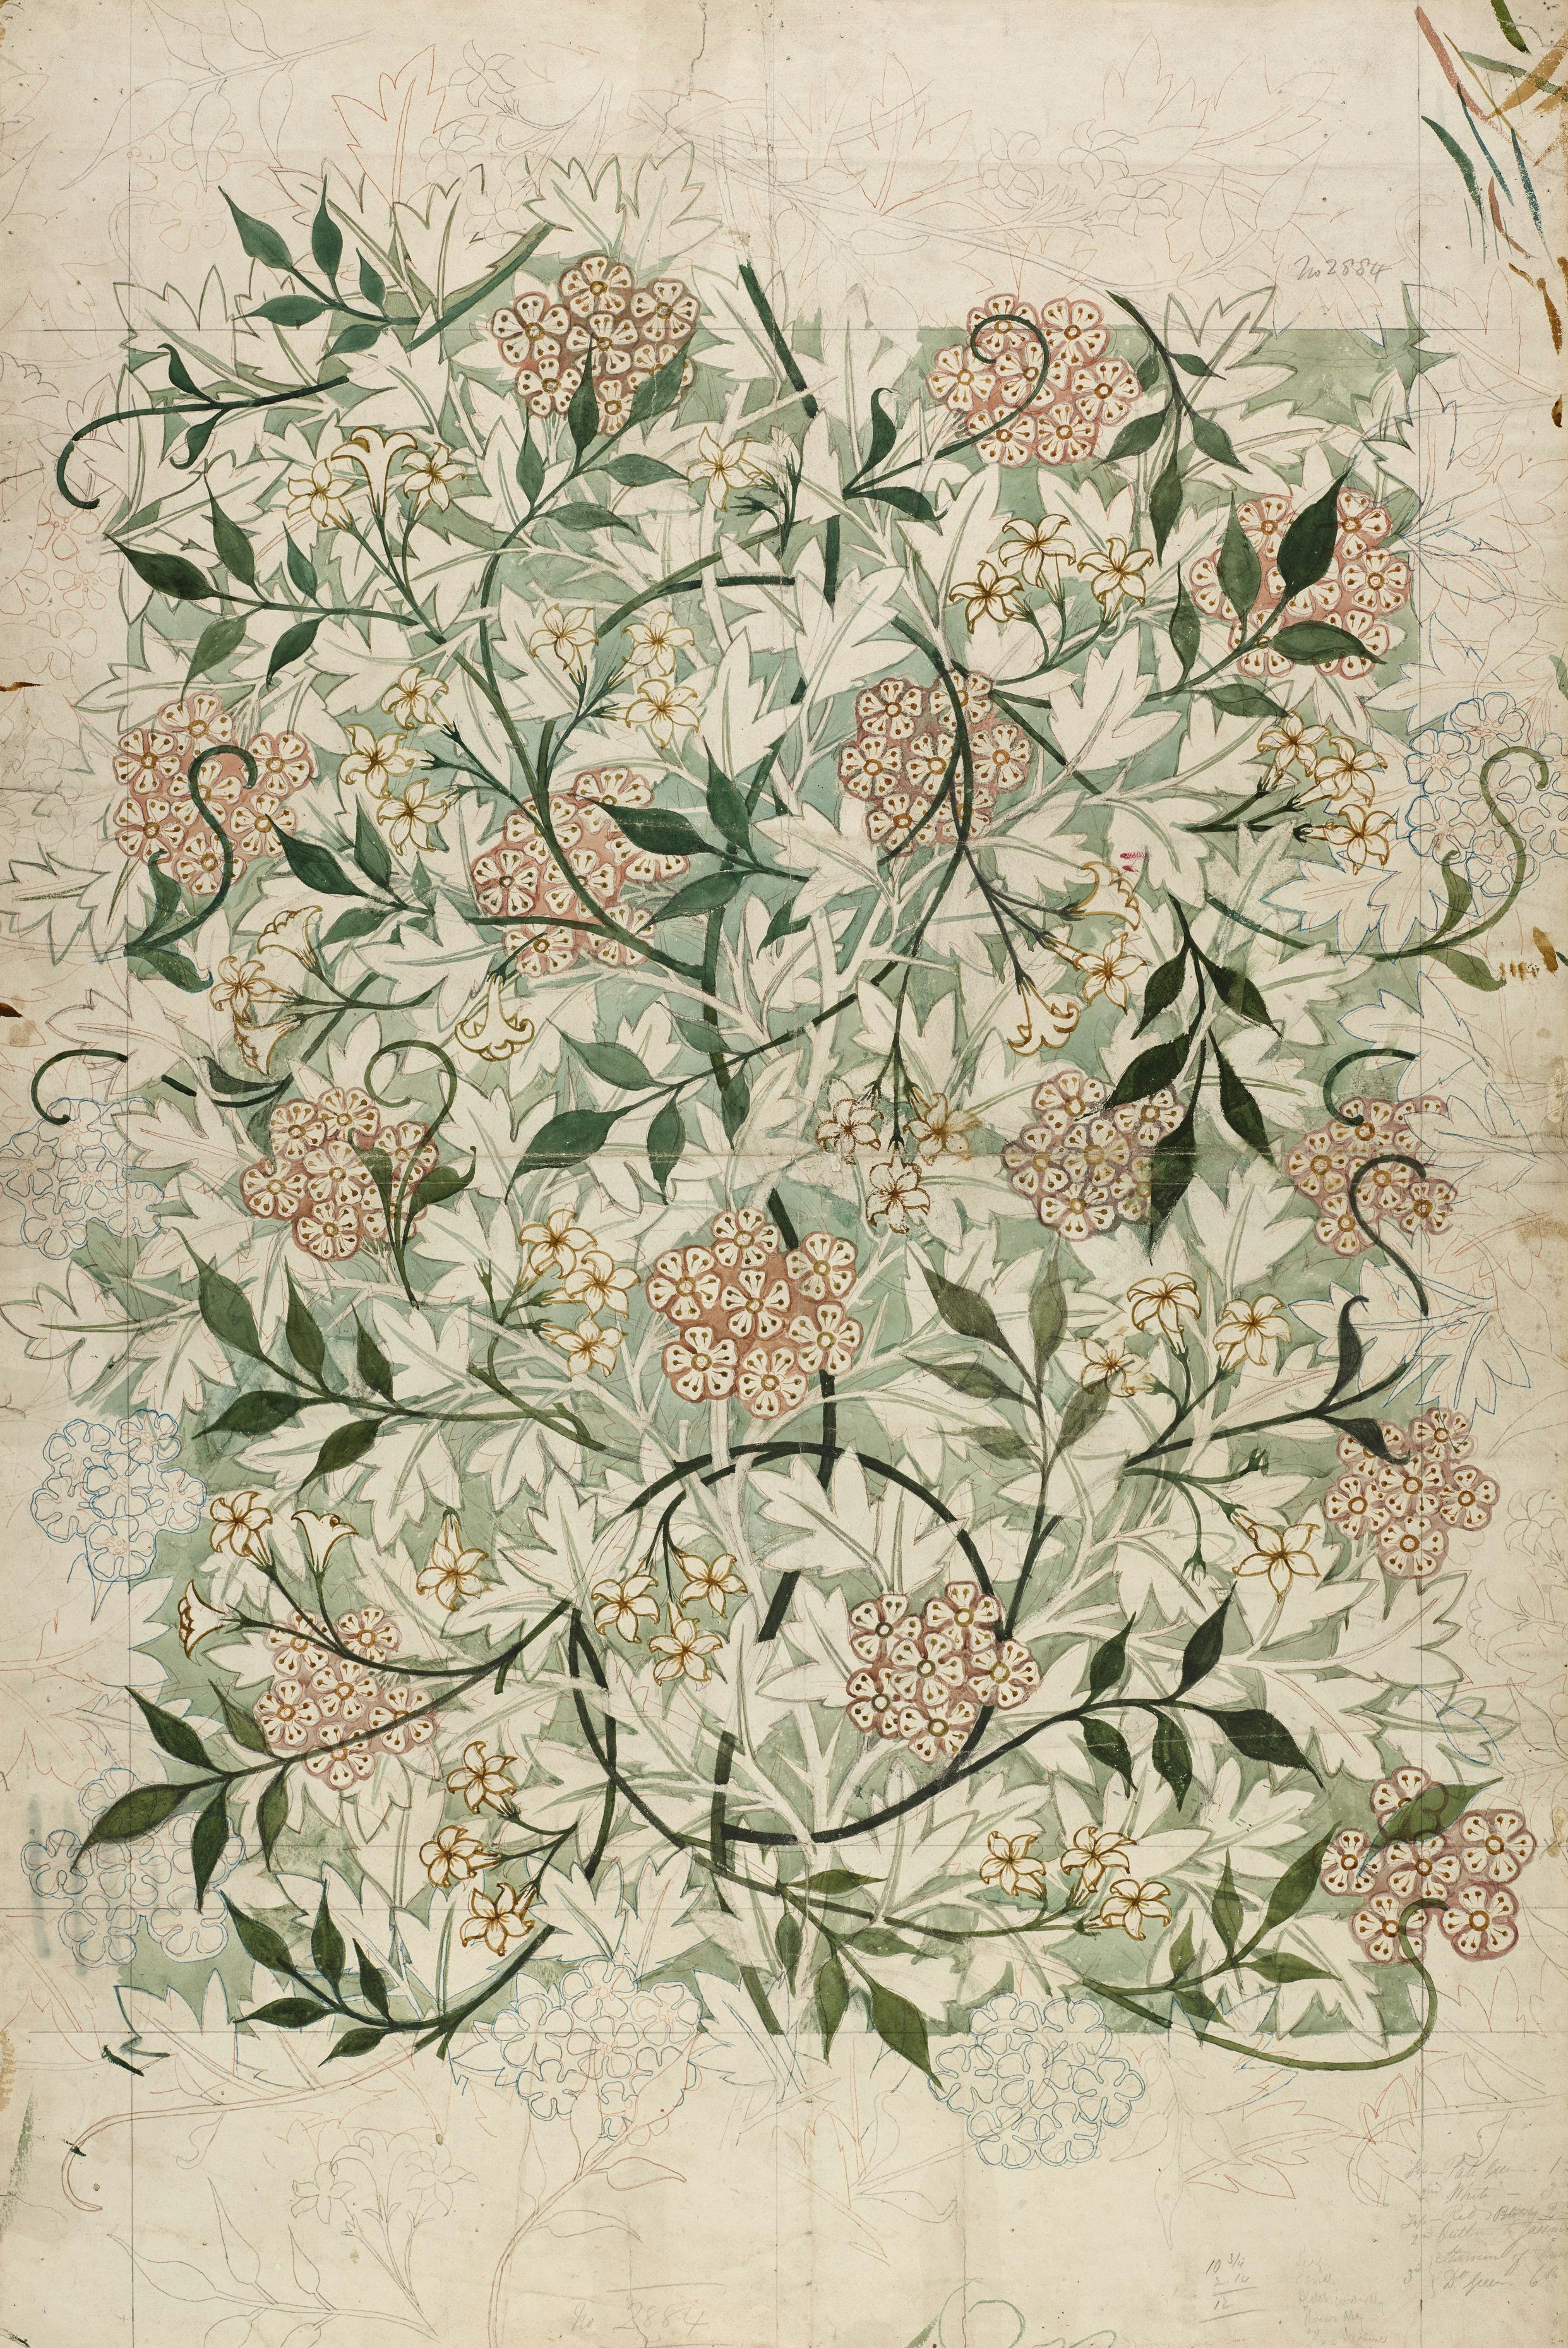 Jasmine. Wallpaper design with background of hawthorn leaves, blossom and branches with a scrolling tracery of jasmine. Green version. Design by William Morris